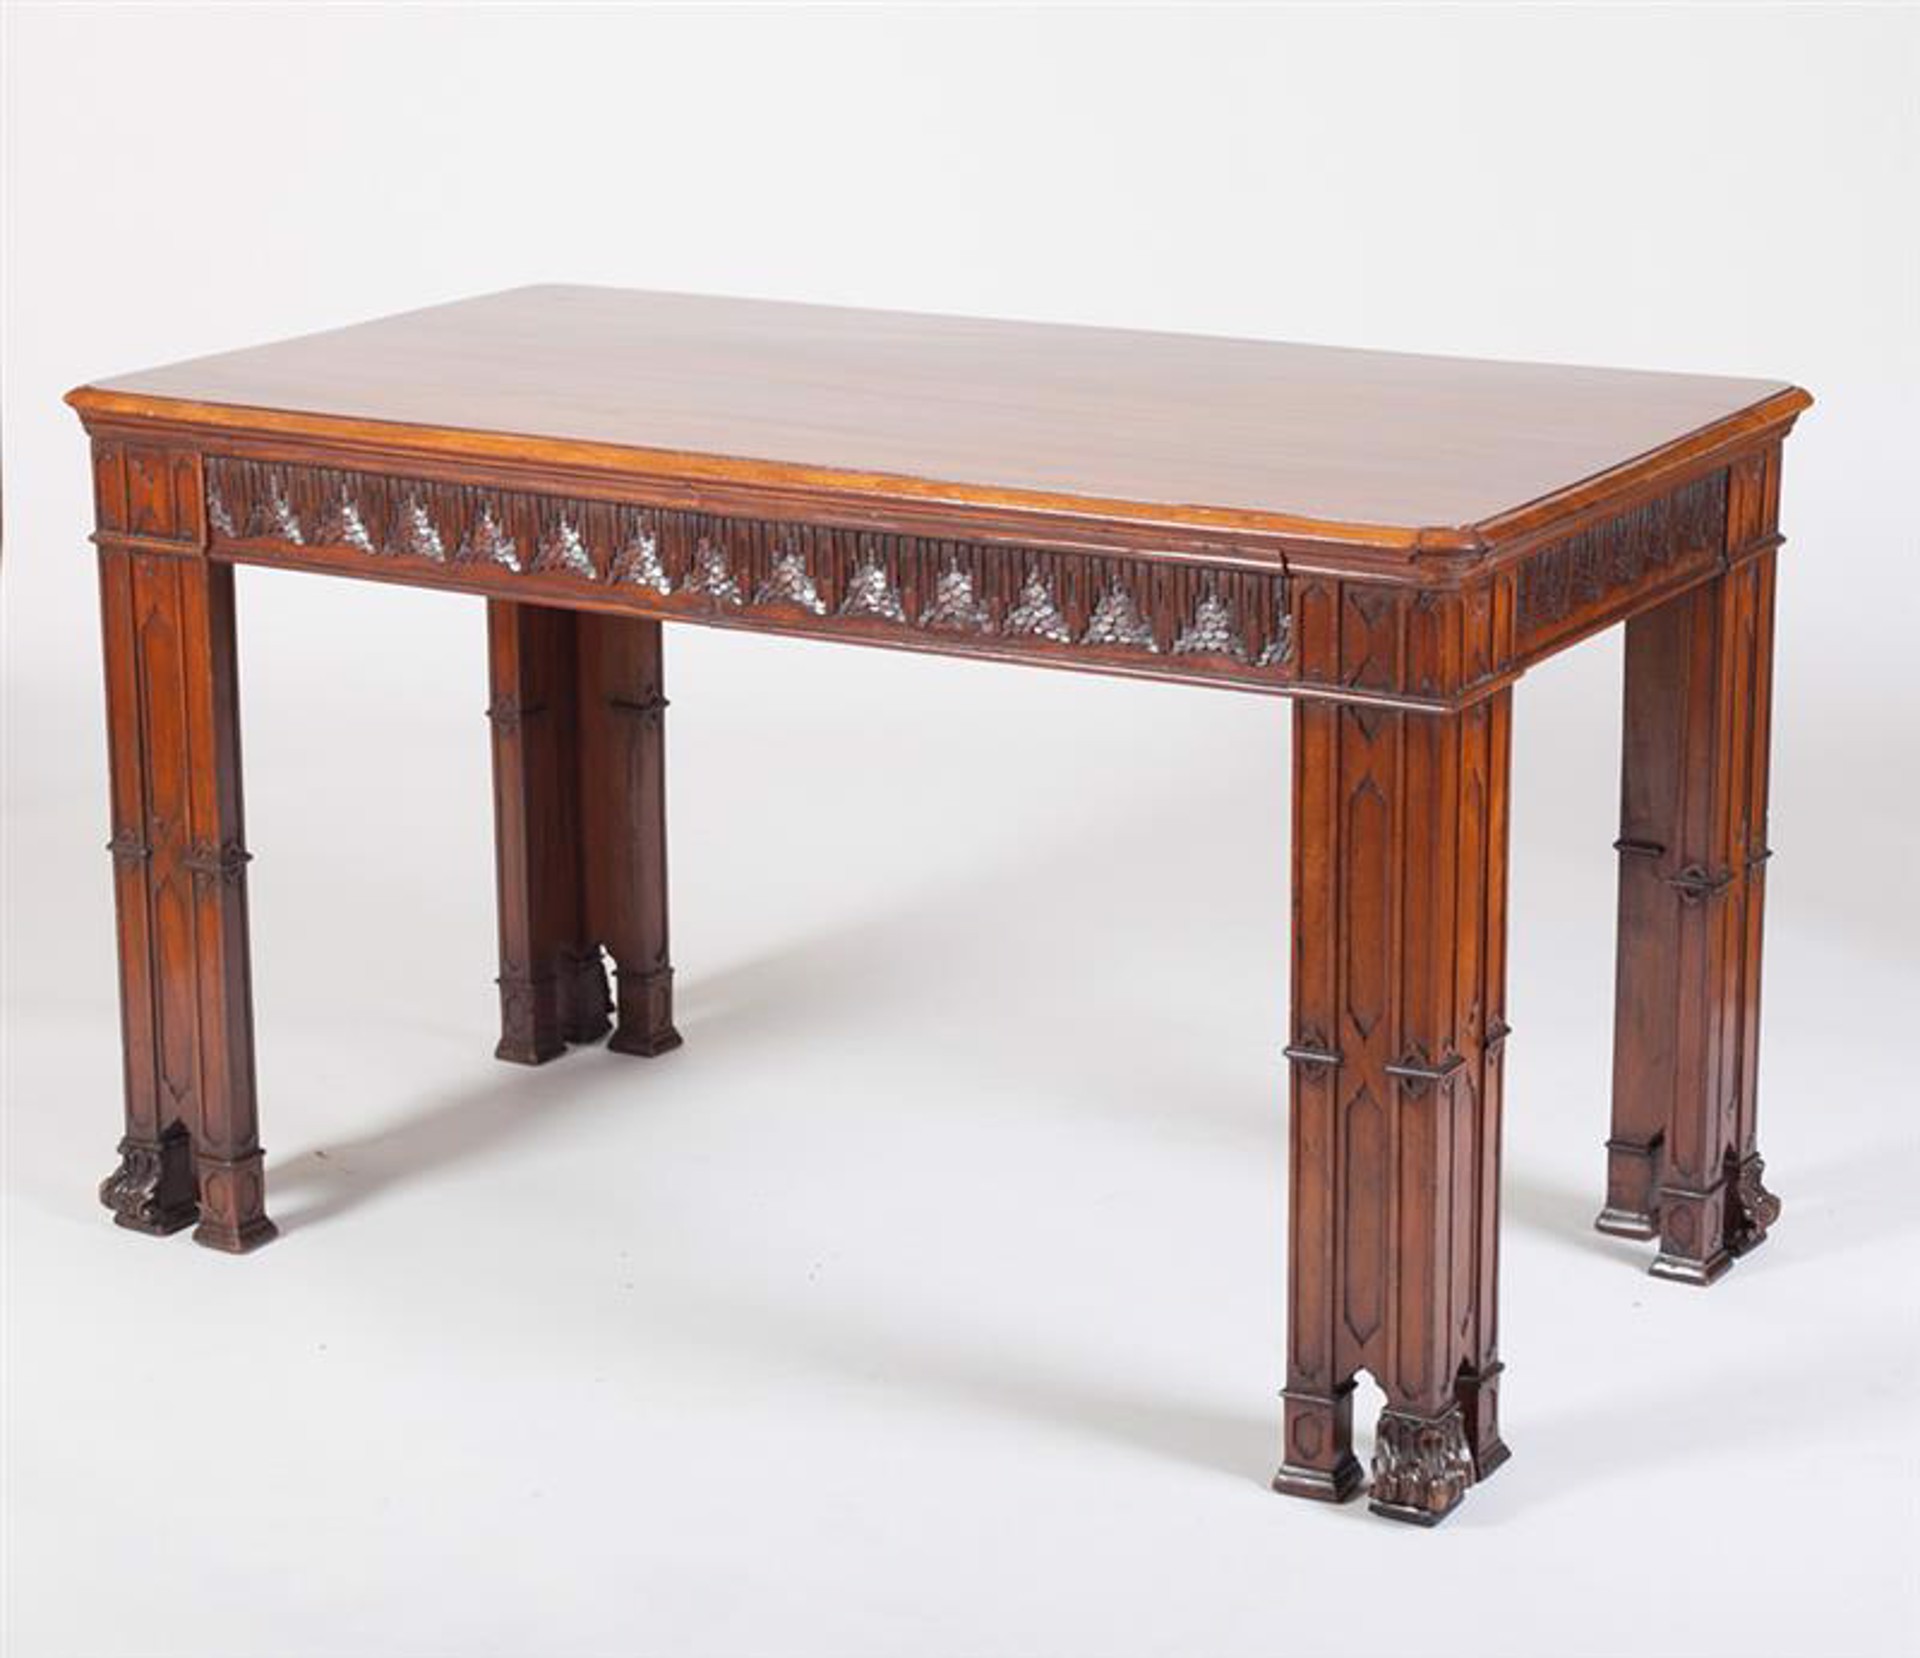 GOTHIC REVIVAL CARVED MAHOGANY LIBRARY TABLE